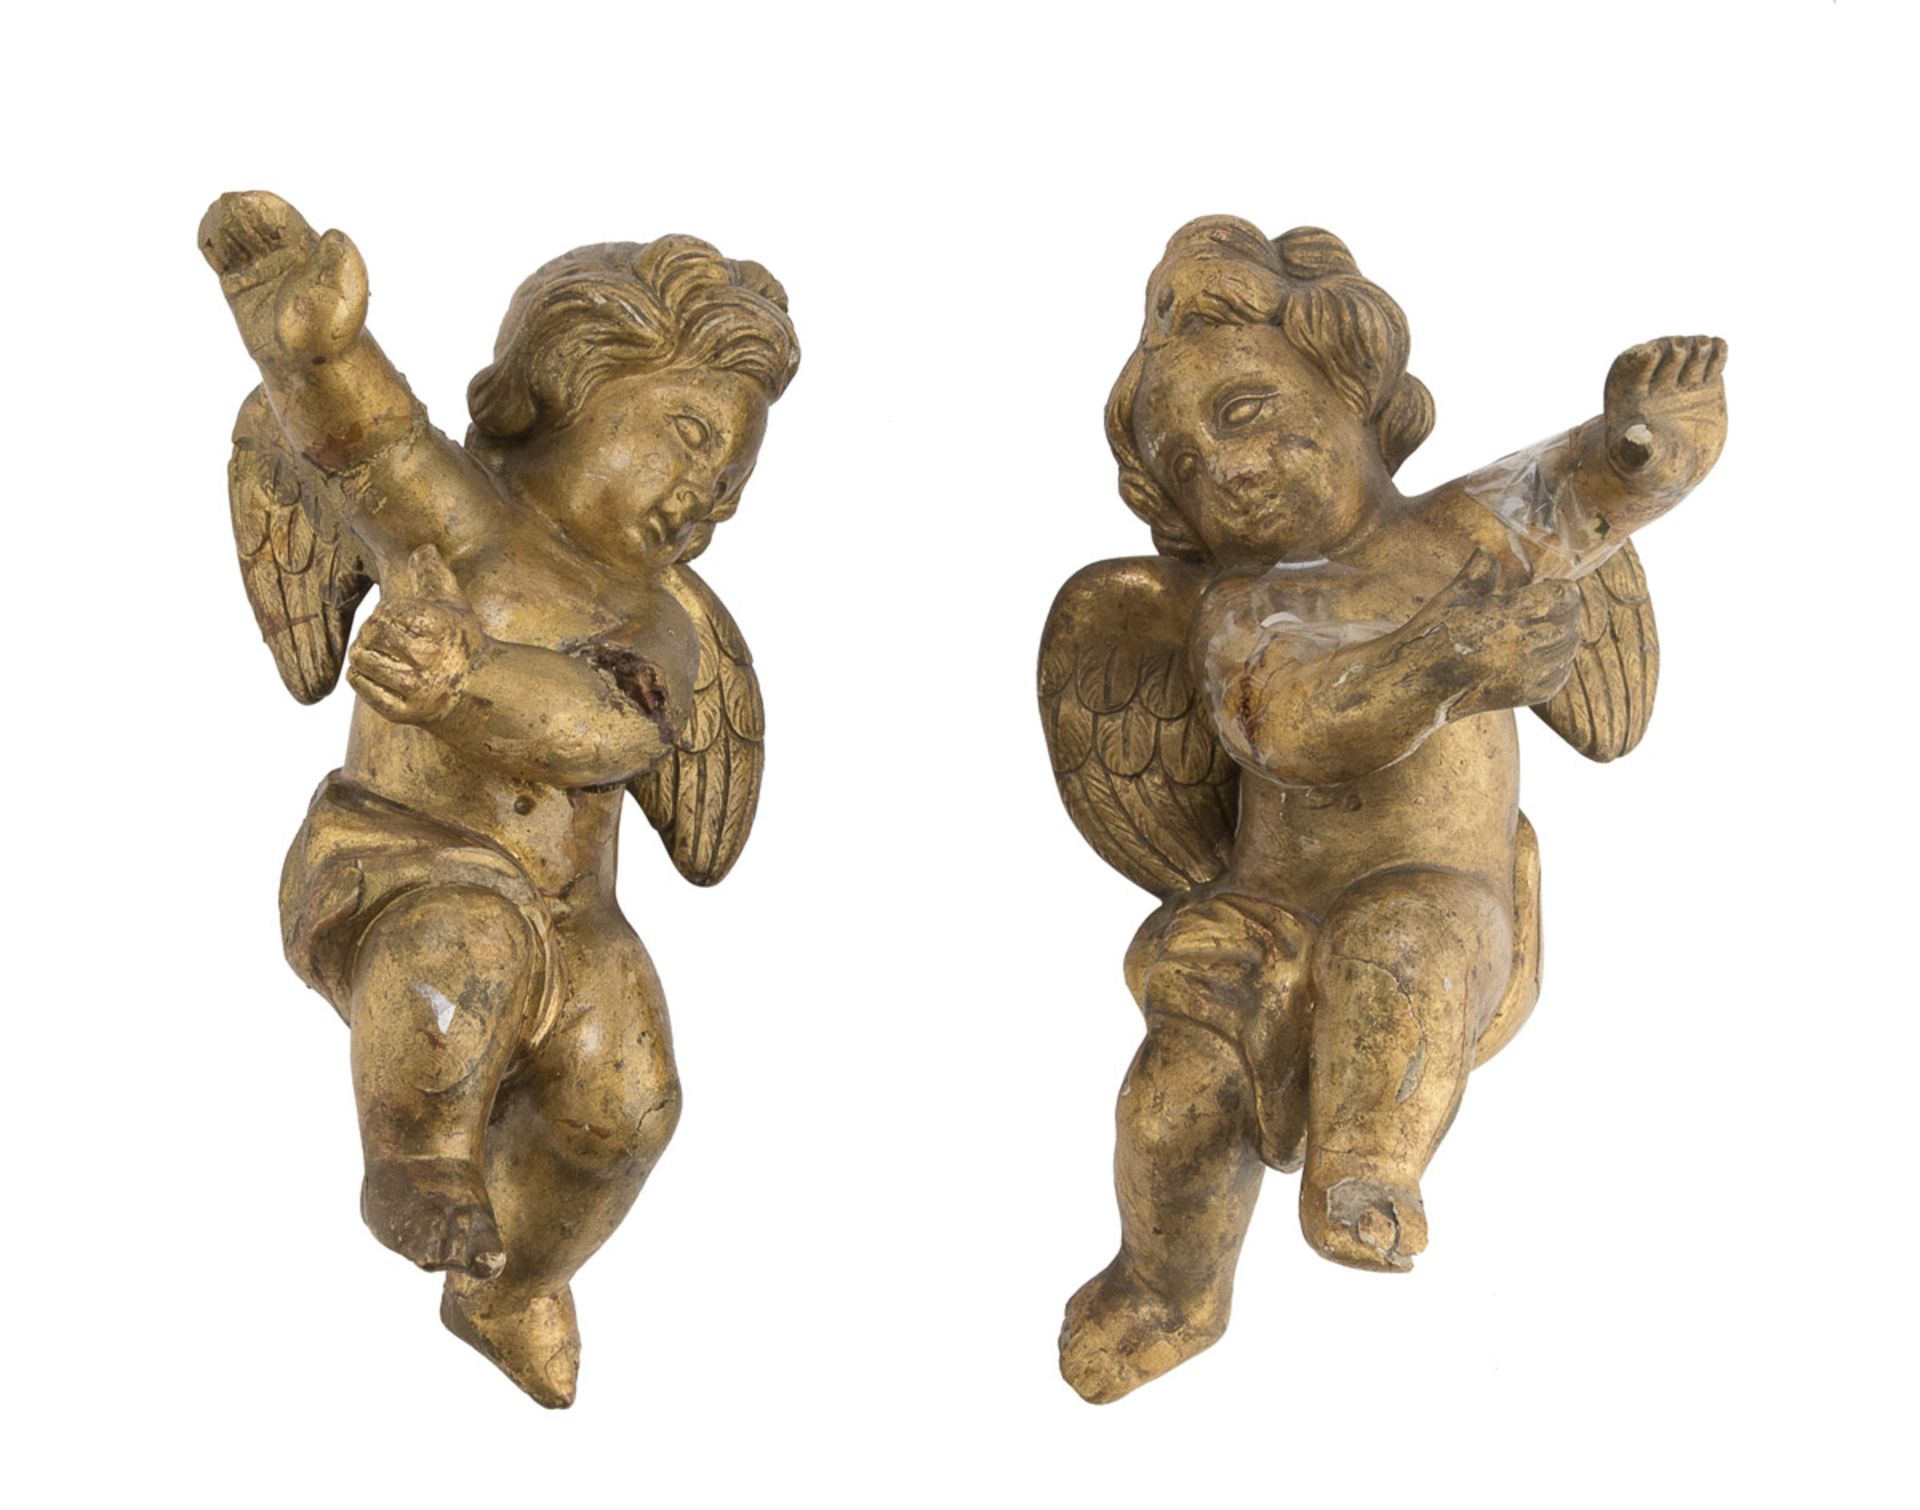 PAIR OF PUTTI IN GILTWOOD - 18TH CENTURY